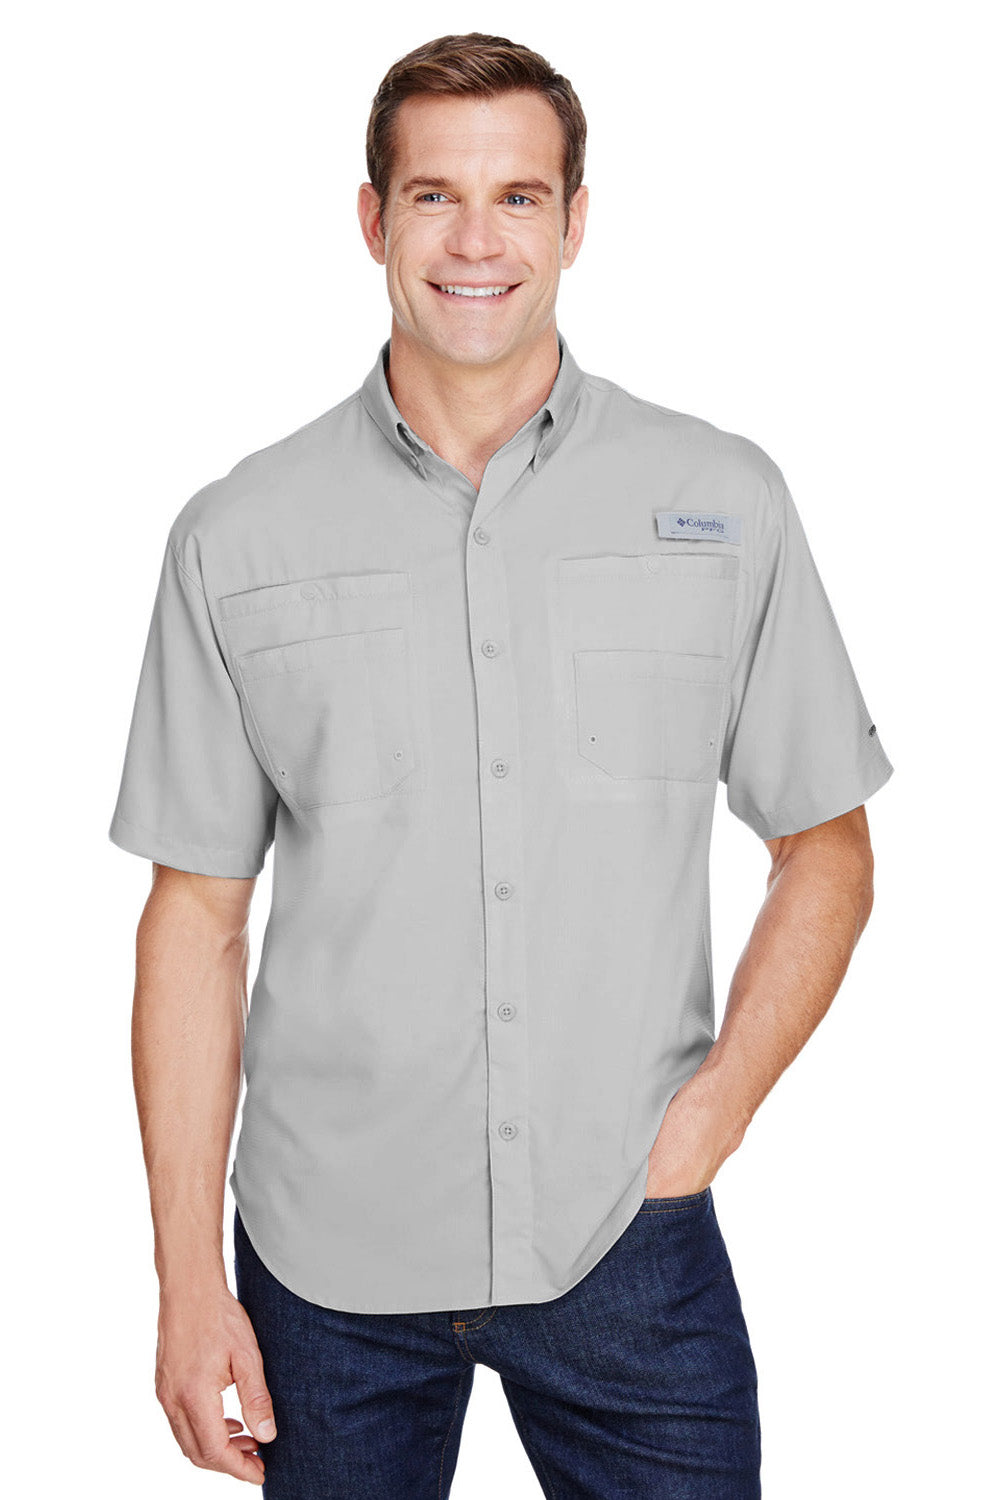 Columbia 7266 Tamiami II Moisture Wicking Short Sleeve Button Down Shirt w/ Double Pockets Cool Grey Front